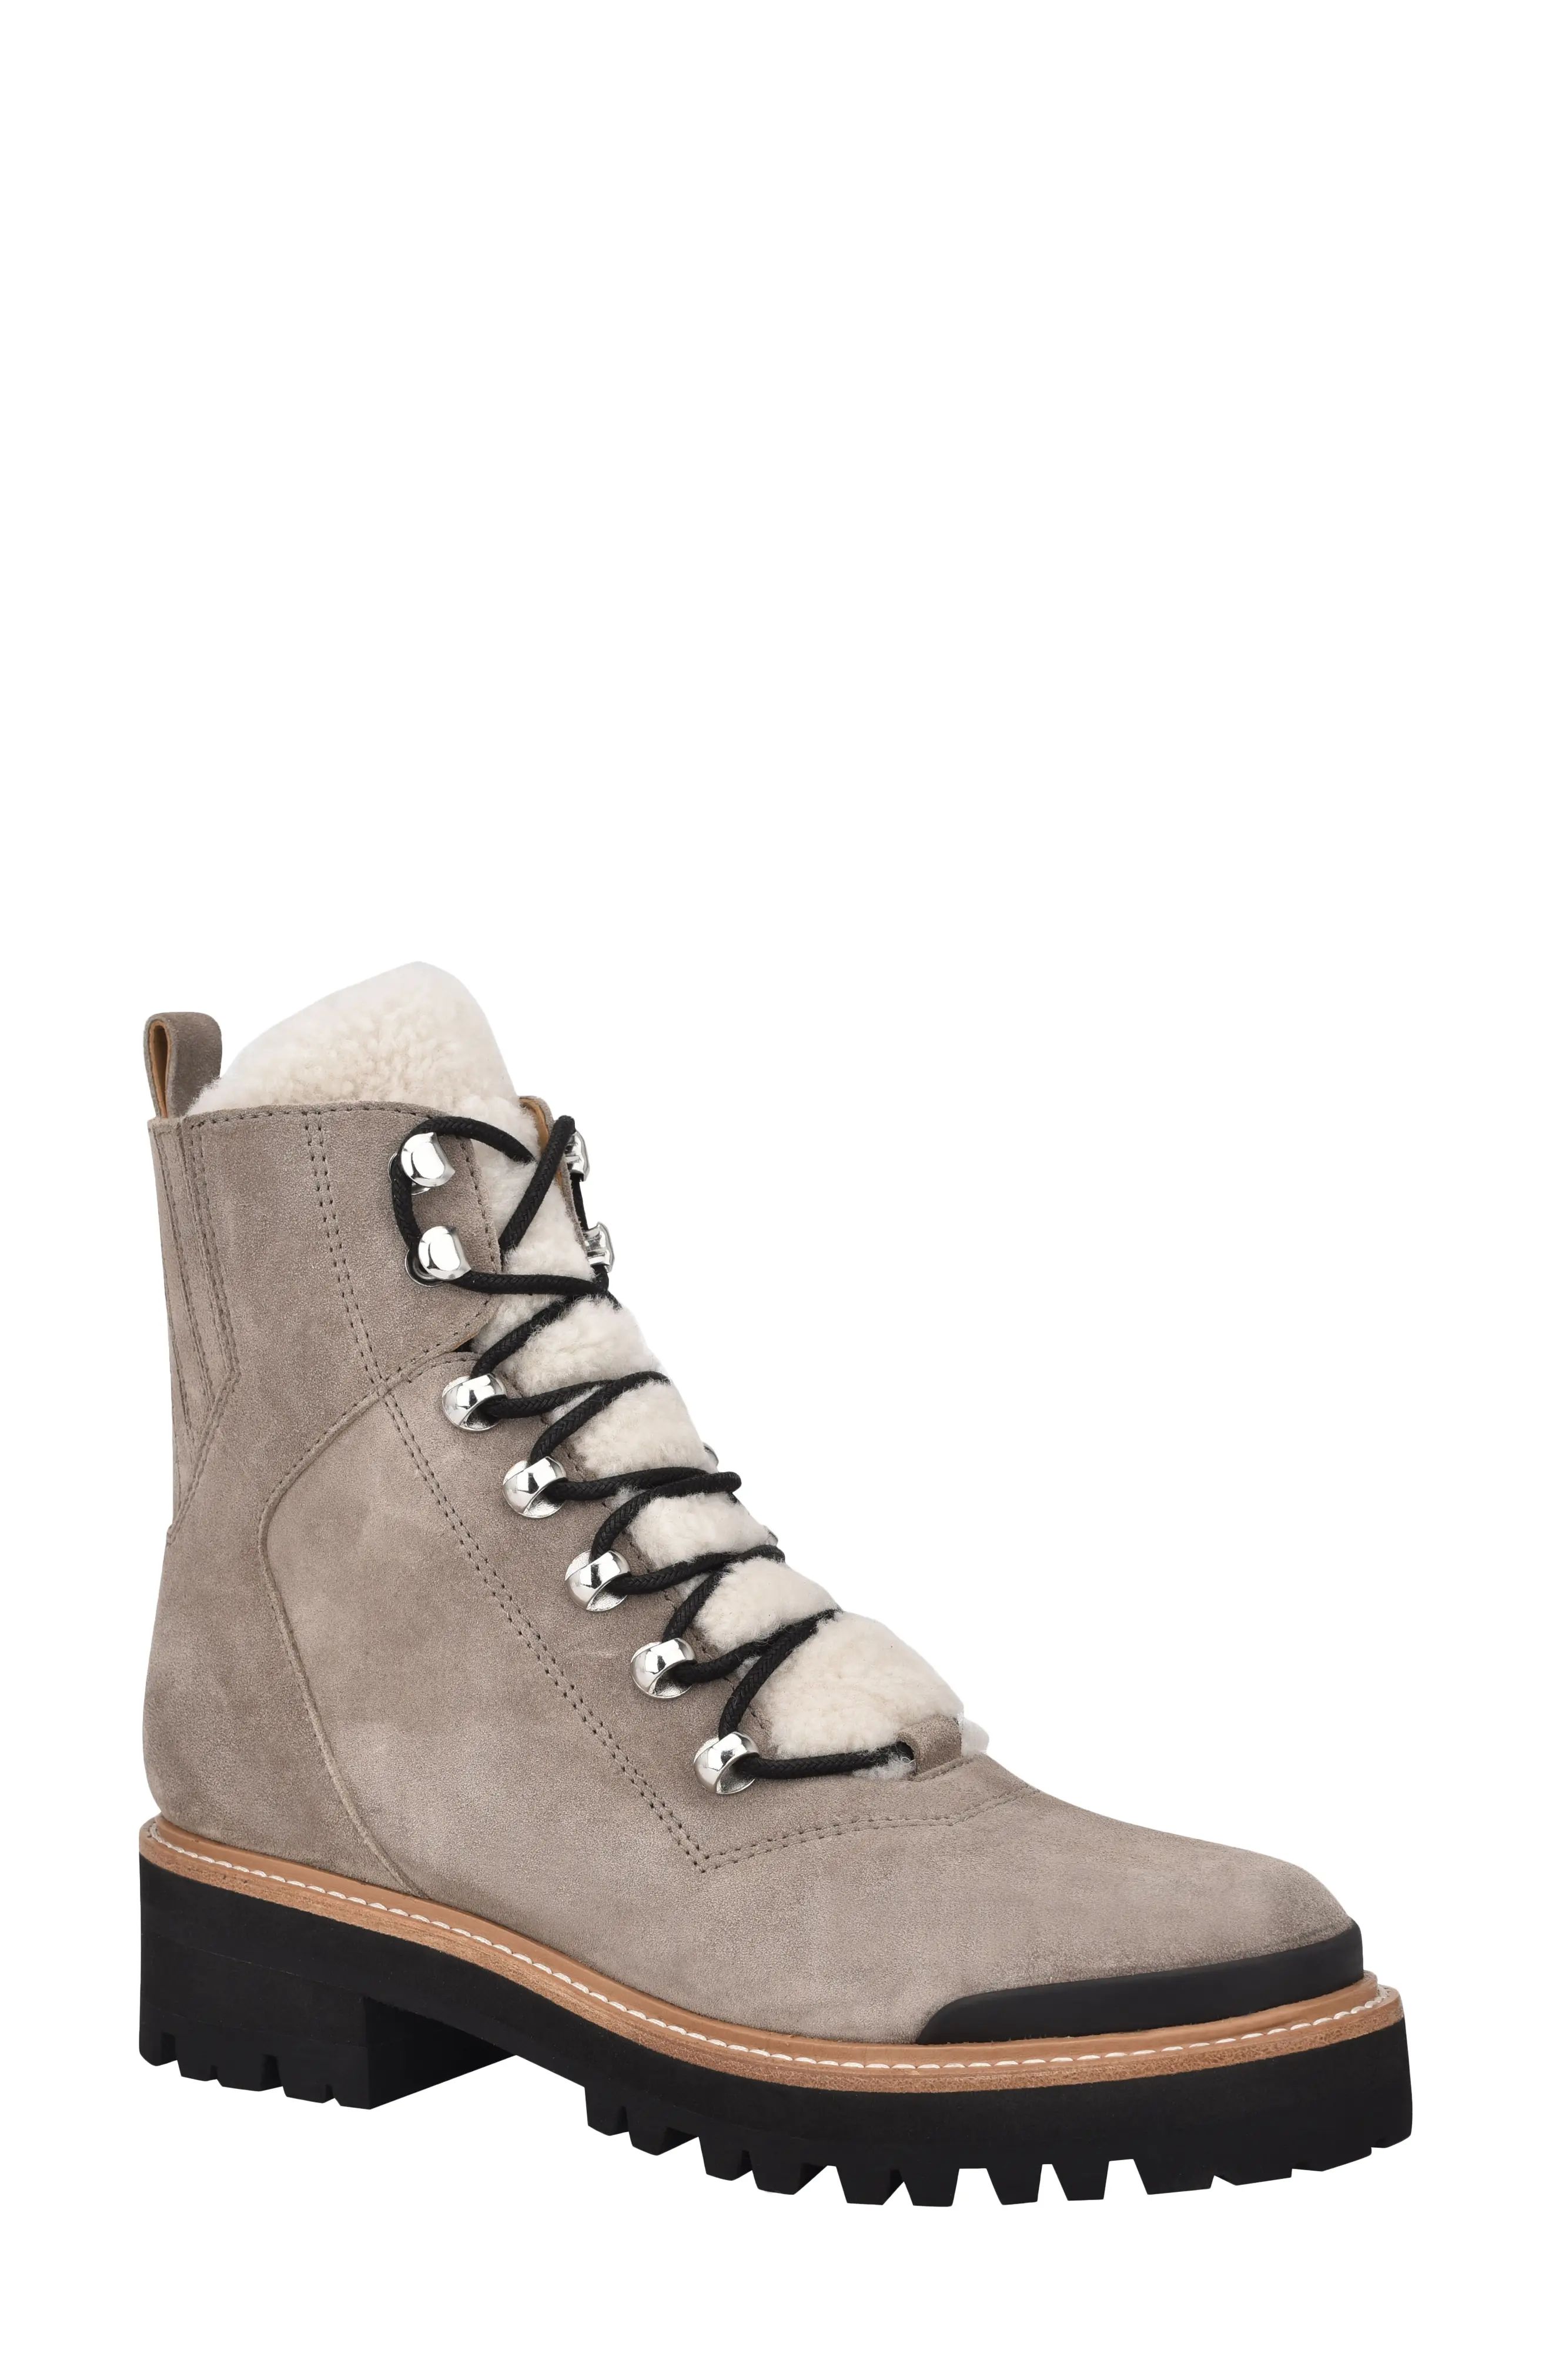 Marc Fisher LTD Izzie Genuine Shearling Lace-Up Boot, Size 9 in Light Cloud Suede at Nordstrom | Nordstrom